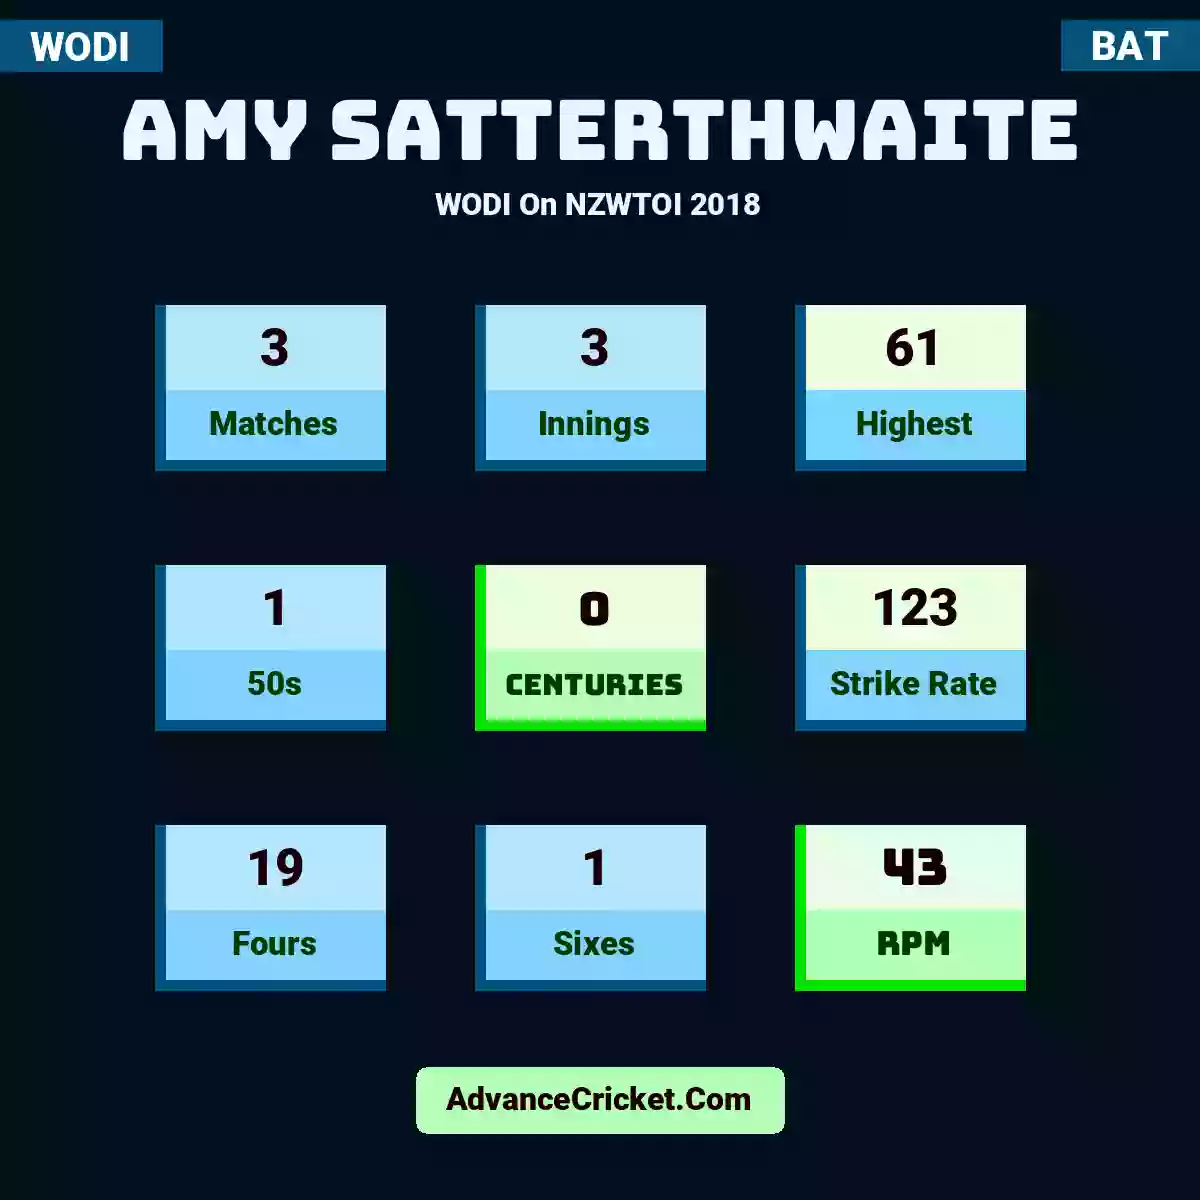 Amy Satterthwaite WODI  On NZWTOI 2018, Amy Satterthwaite played 3 matches, scored 61 runs as highest, 1 half-centuries, and 0 centuries, with a strike rate of 123. A.Satterthwaite hit 19 fours and 1 sixes, with an RPM of 43.